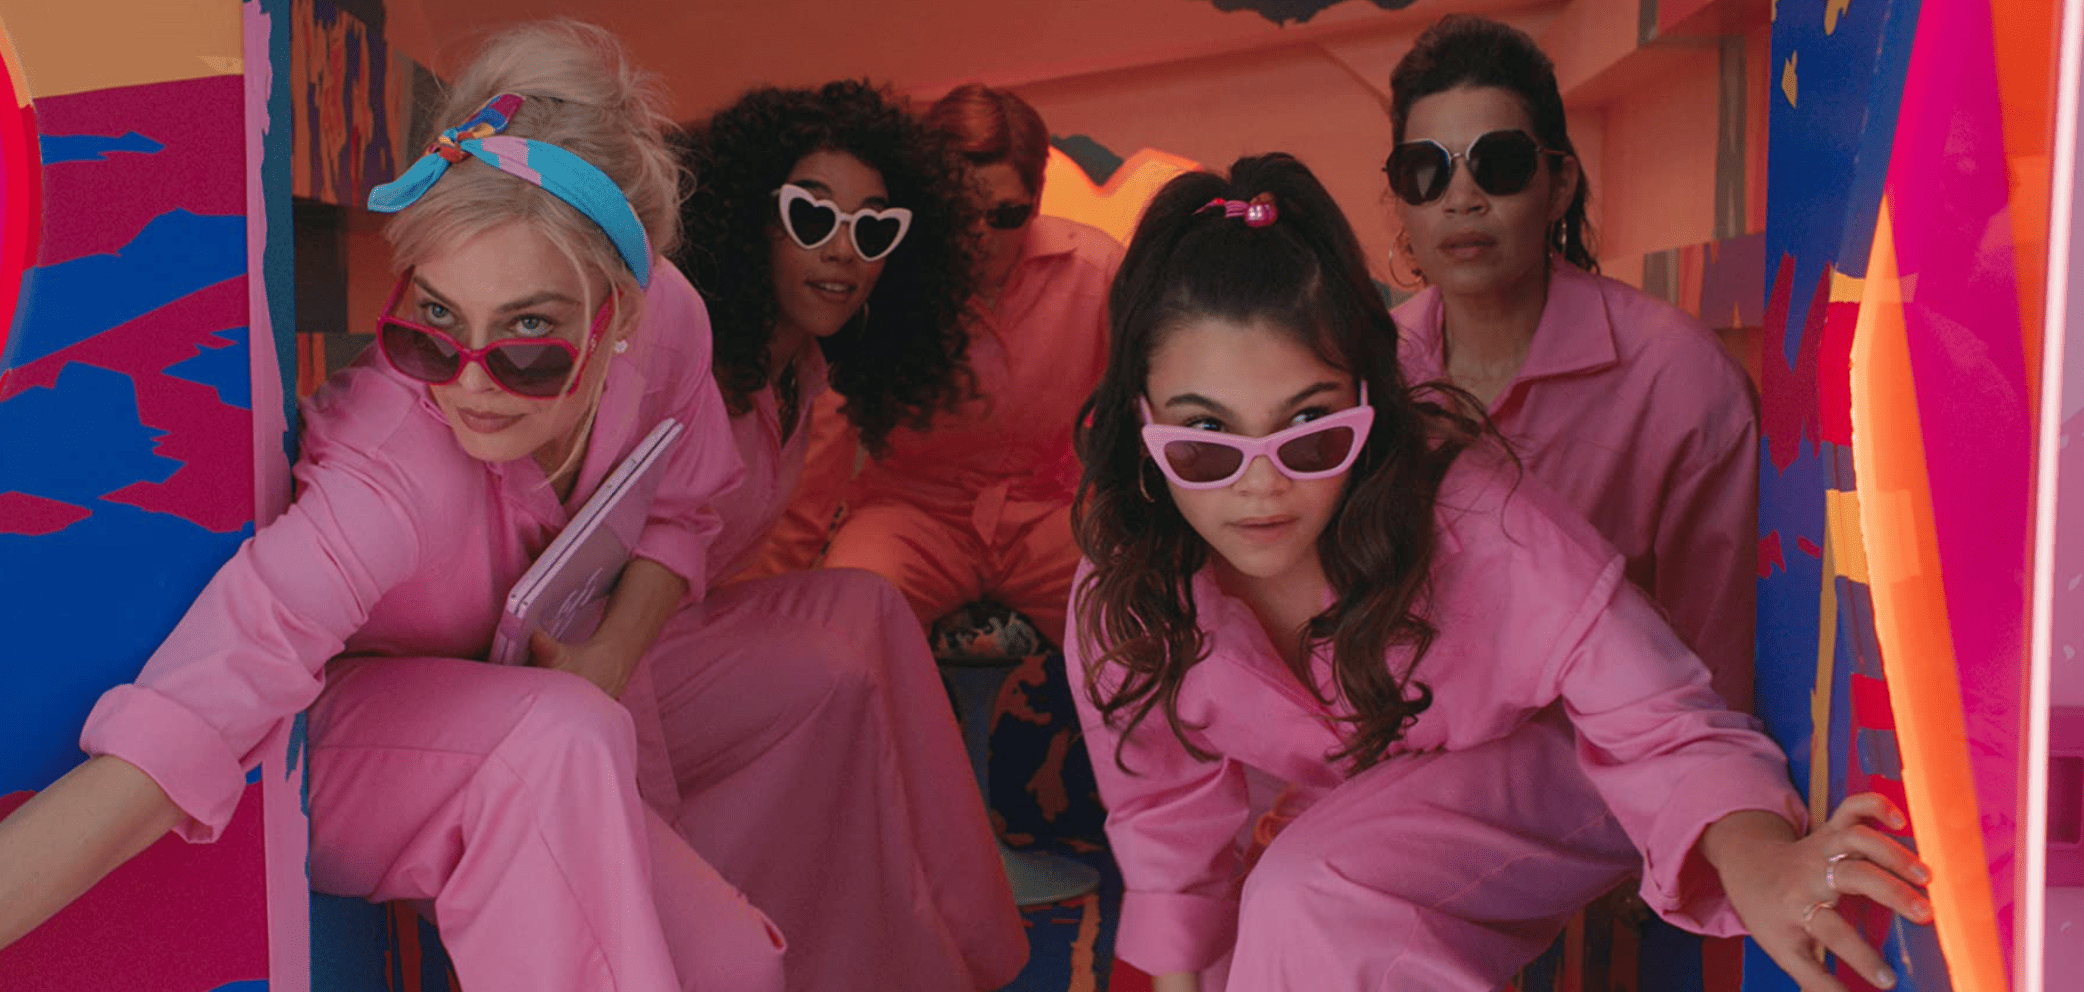 Margot Robbie, Alexandra Shipp, Michael Cera, America Ferrera, and Ariana Greenblatt climb out of the back of a truck wearing all-pink coveralls in this image from Warner Bros